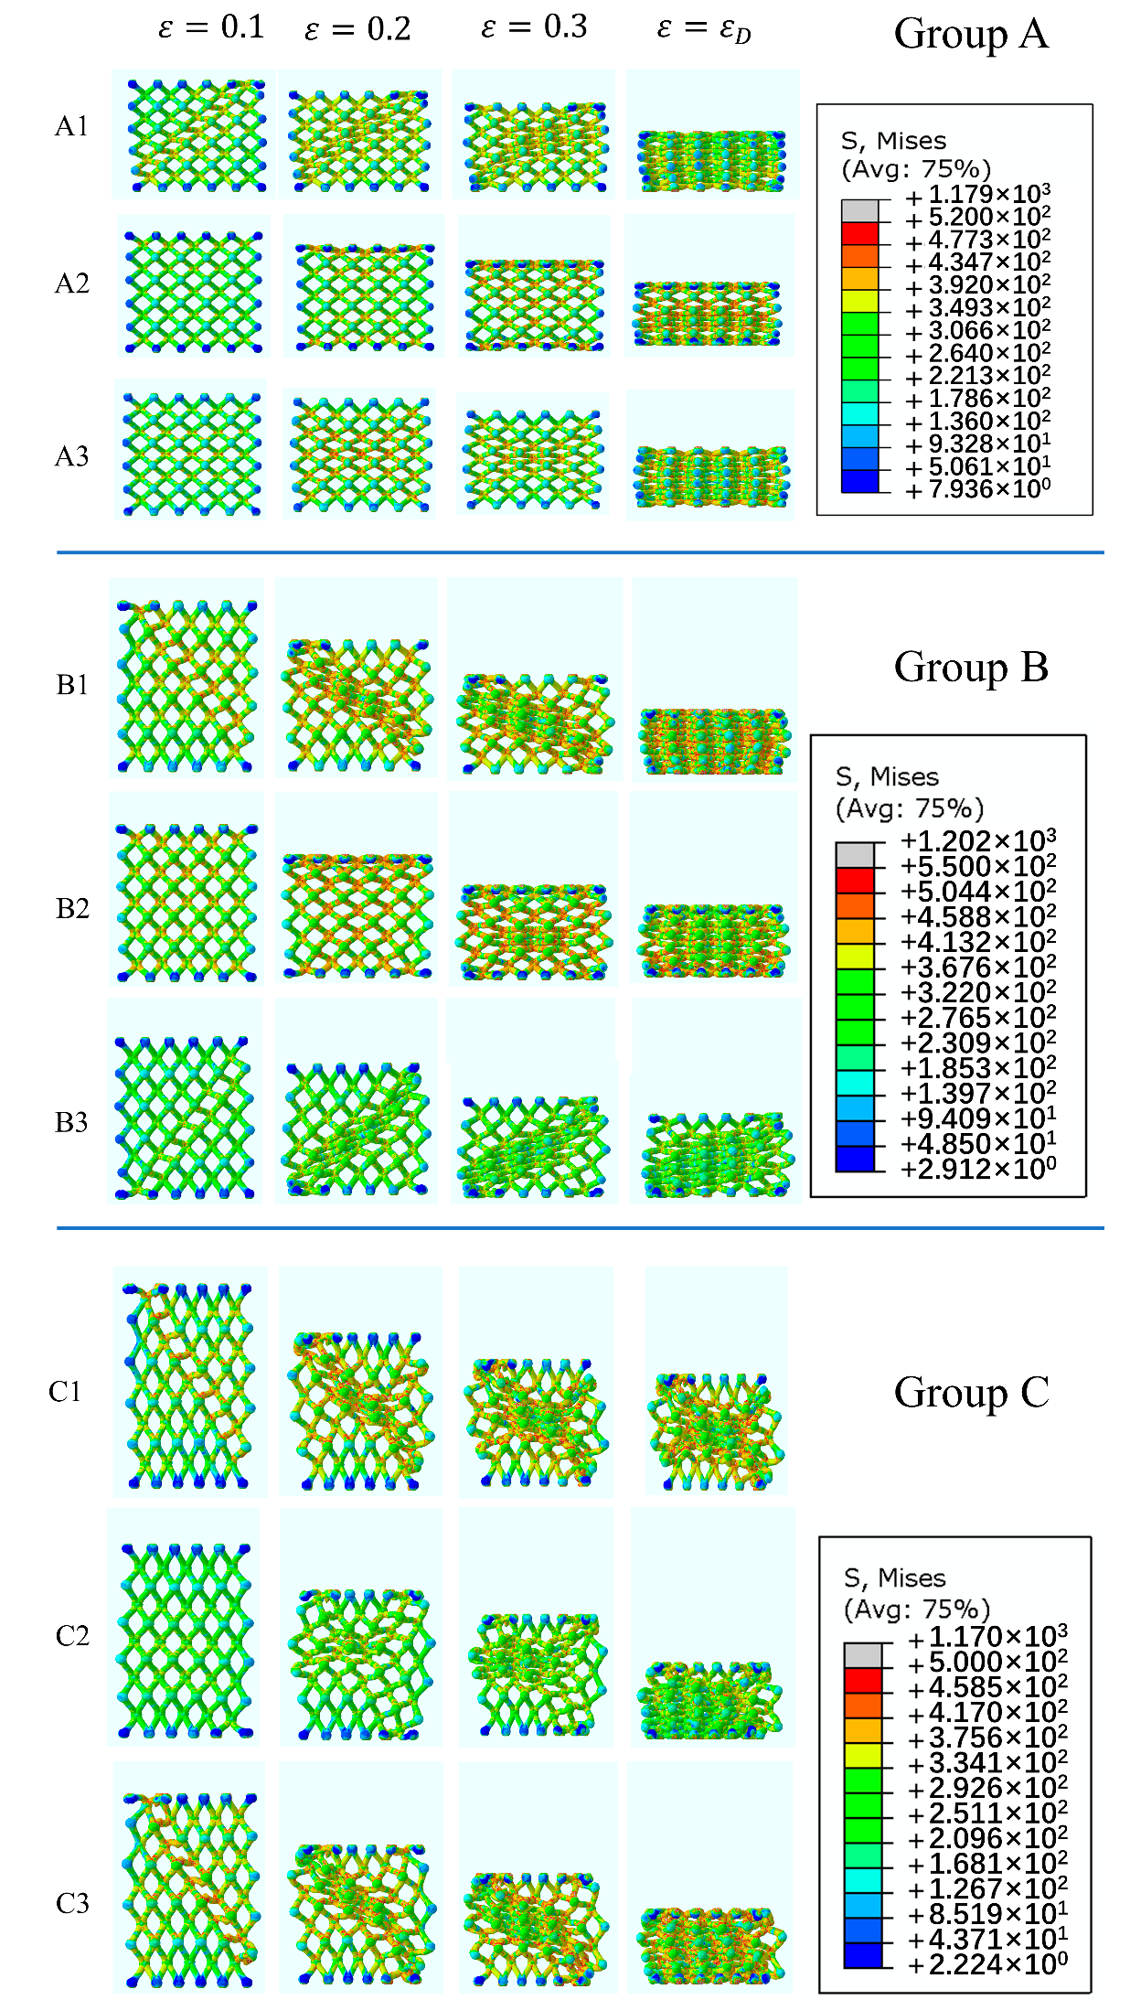 Mises stress distribution diagrams of EP lattice structures in Group A, B, and C.